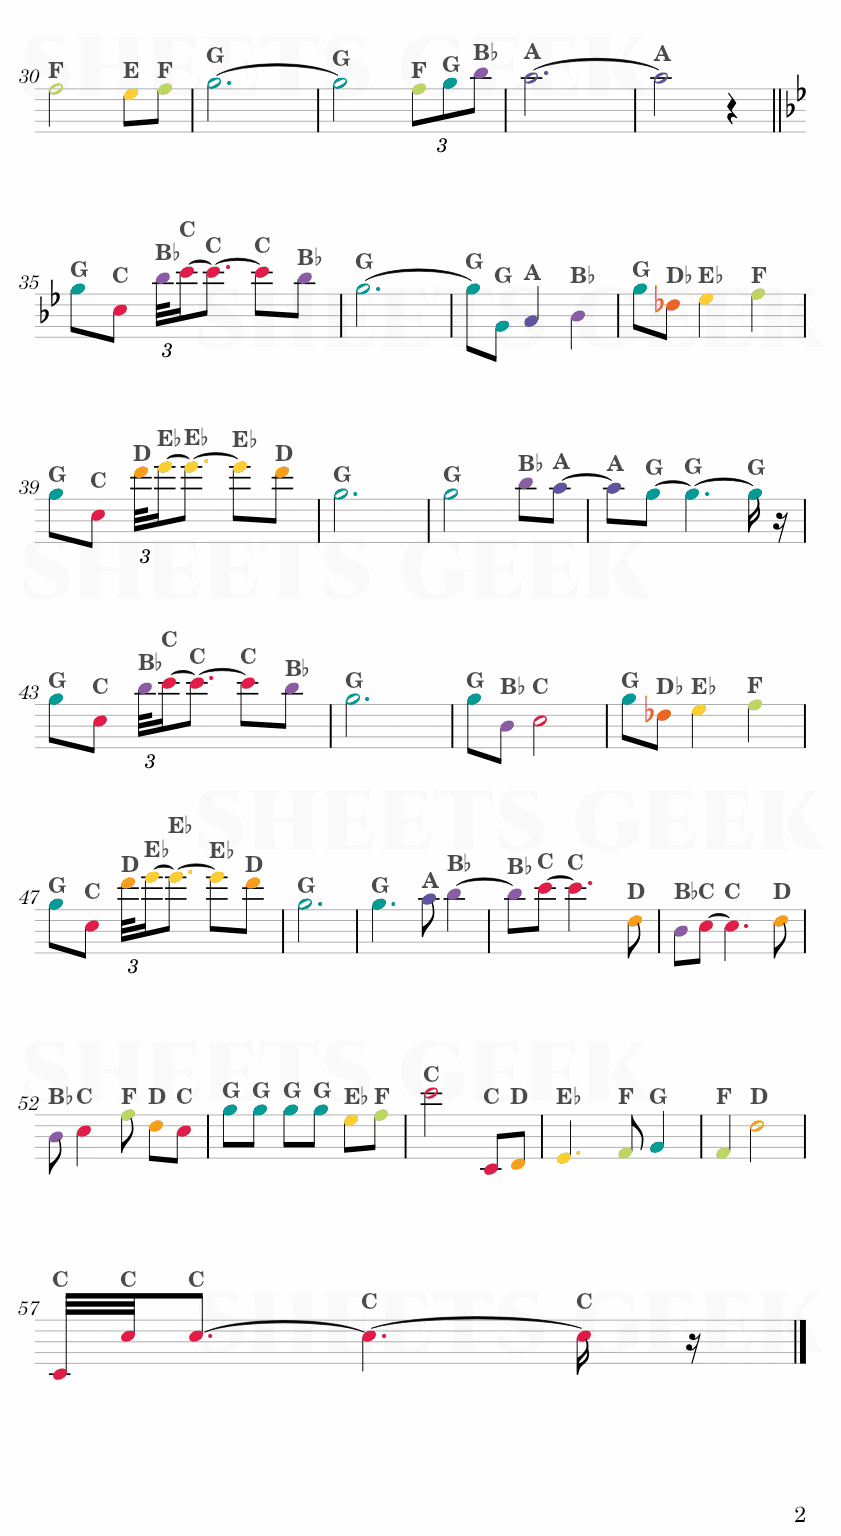 The Legend of Zelda: Breath of the Wild - Theme Easy Sheet Music Free for piano, keyboard, flute, violin, sax, cello page 2